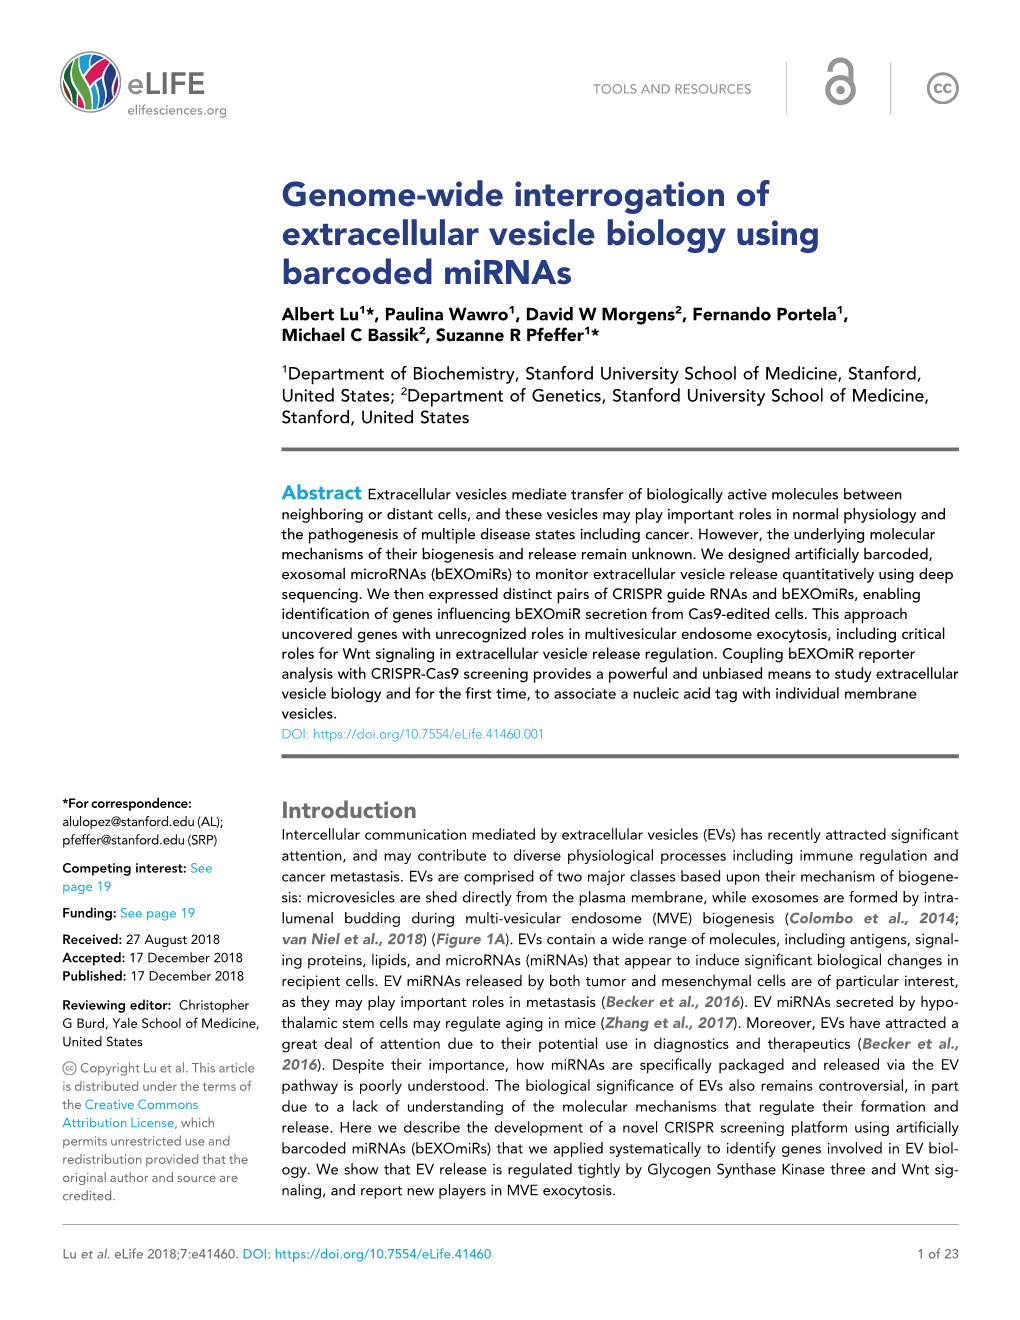 Genome-Wide Interrogation of Extracellular Vesicle Biology Using